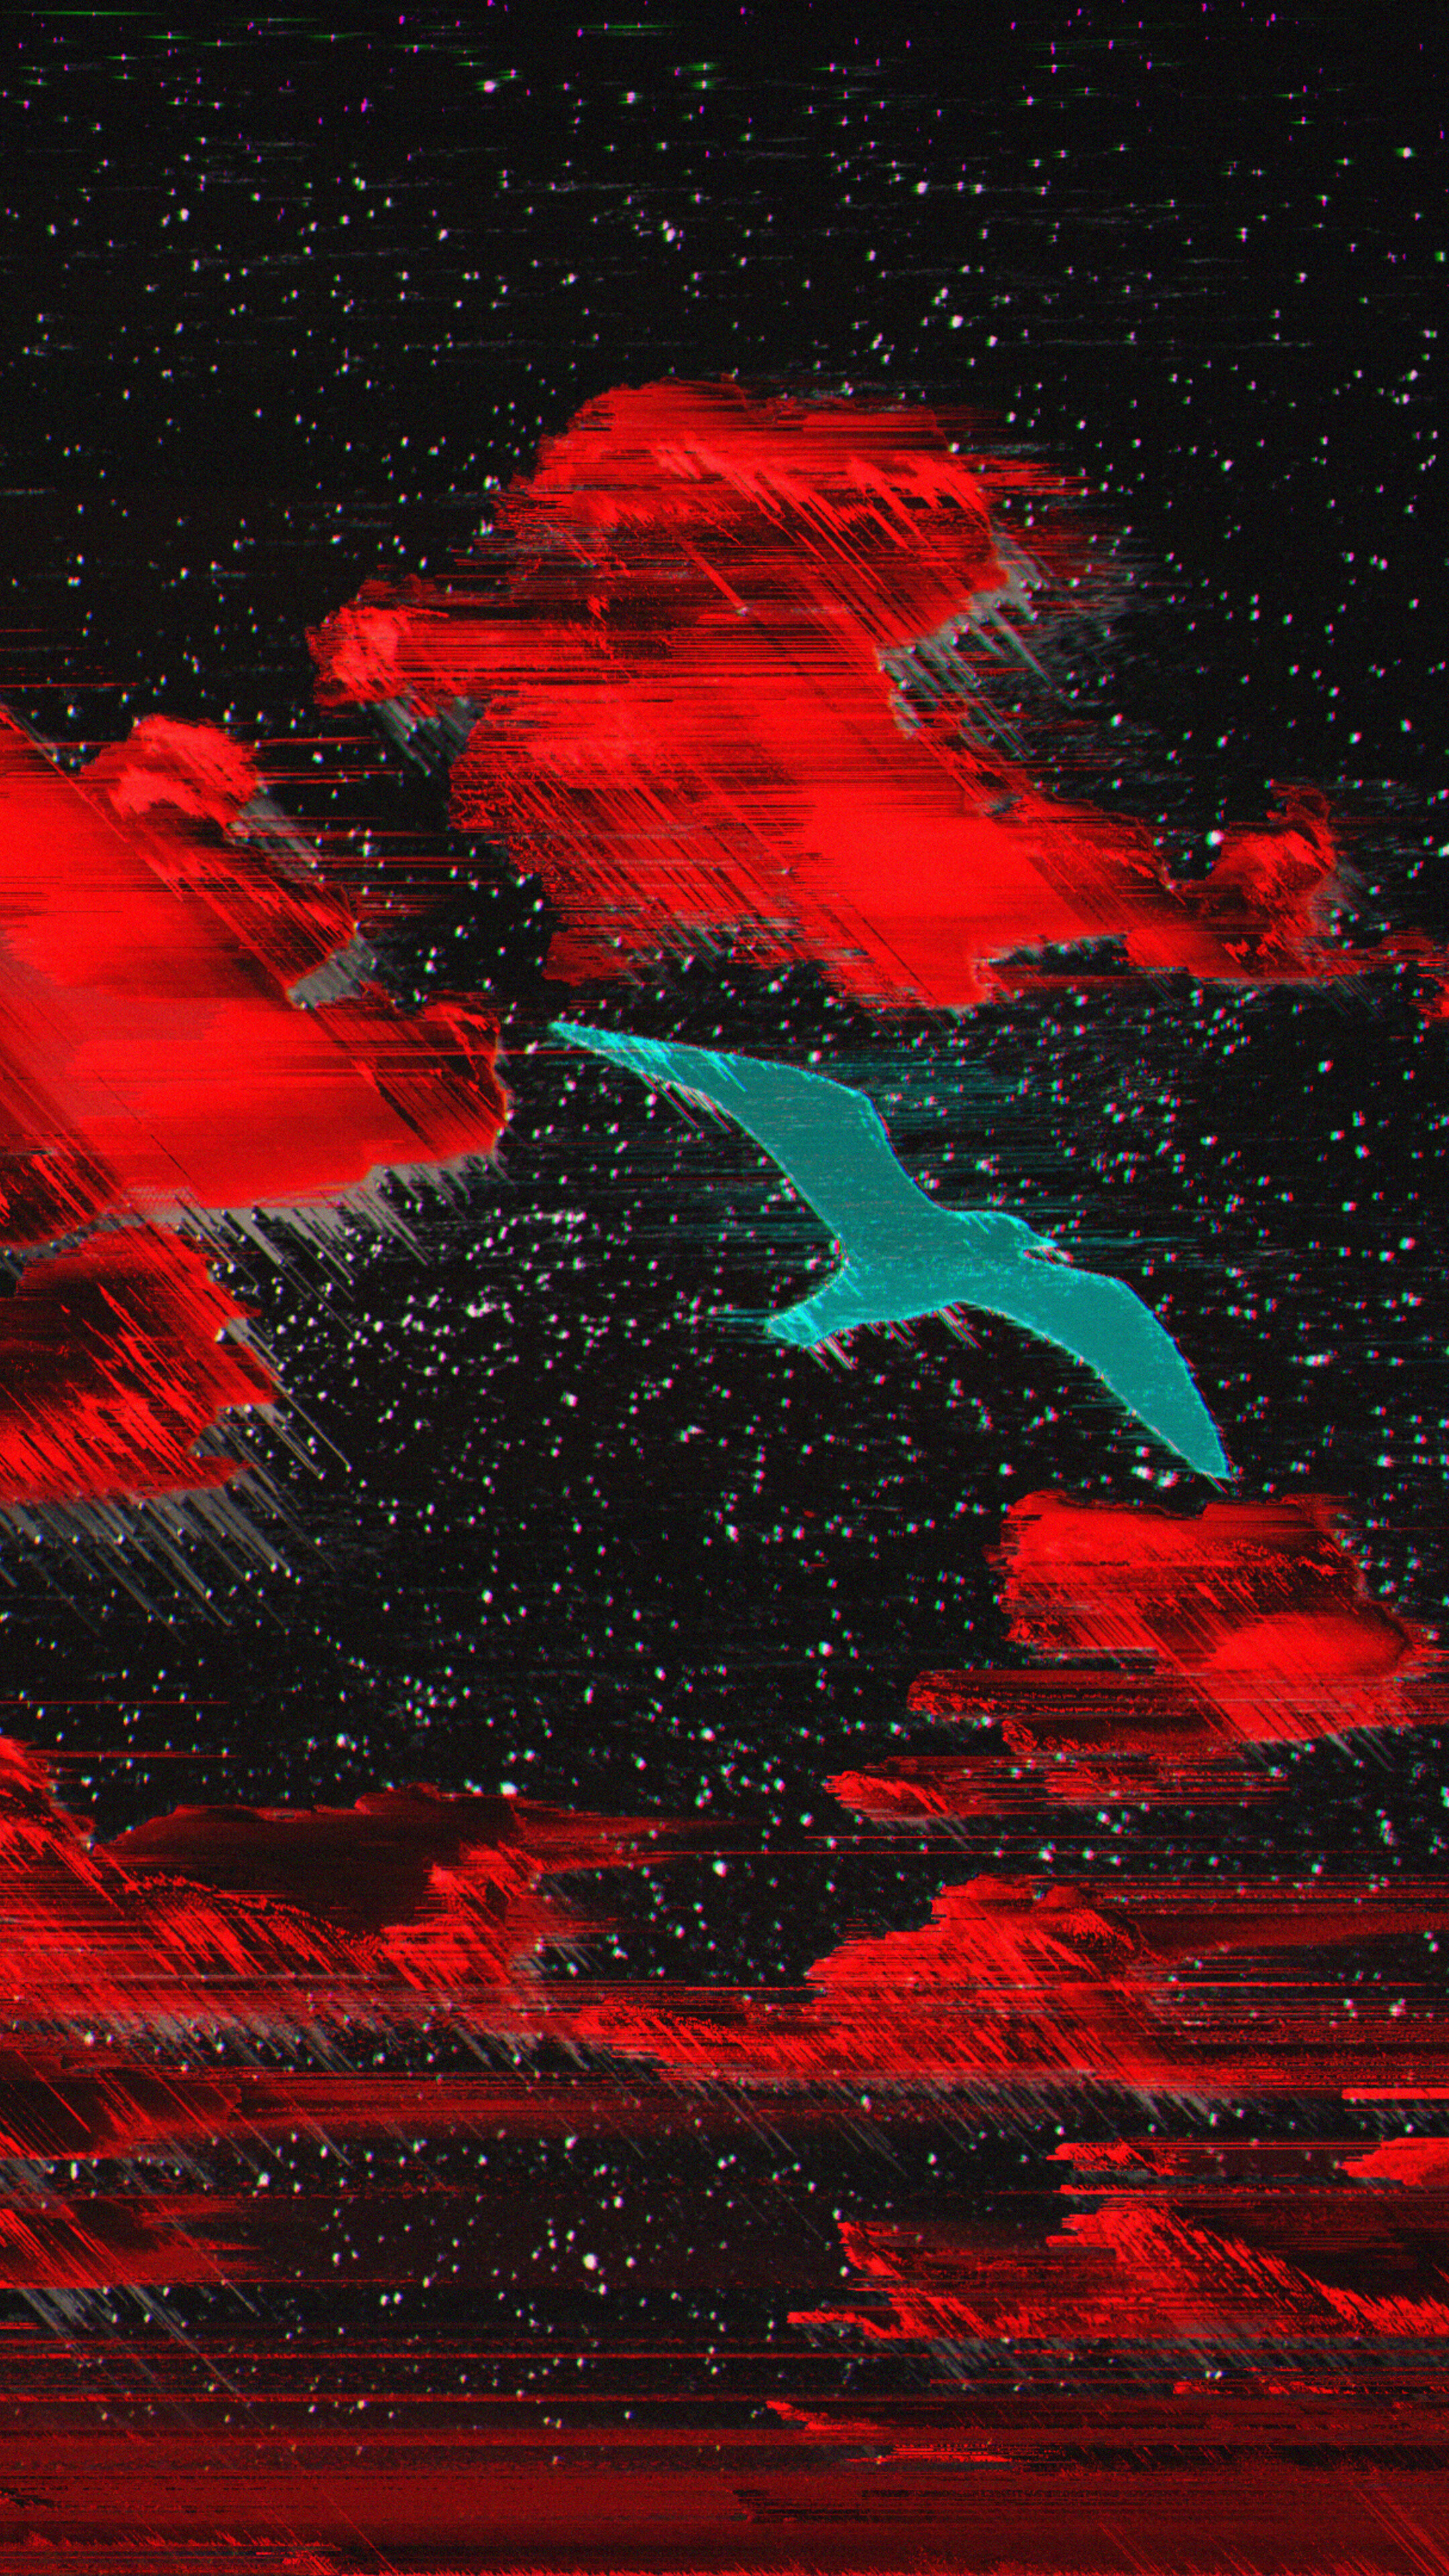 Glitch: Abstract art, Red clouds, Blue bird, Starry sky, Two-dimensional space. 2160x3840 4K Wallpaper.